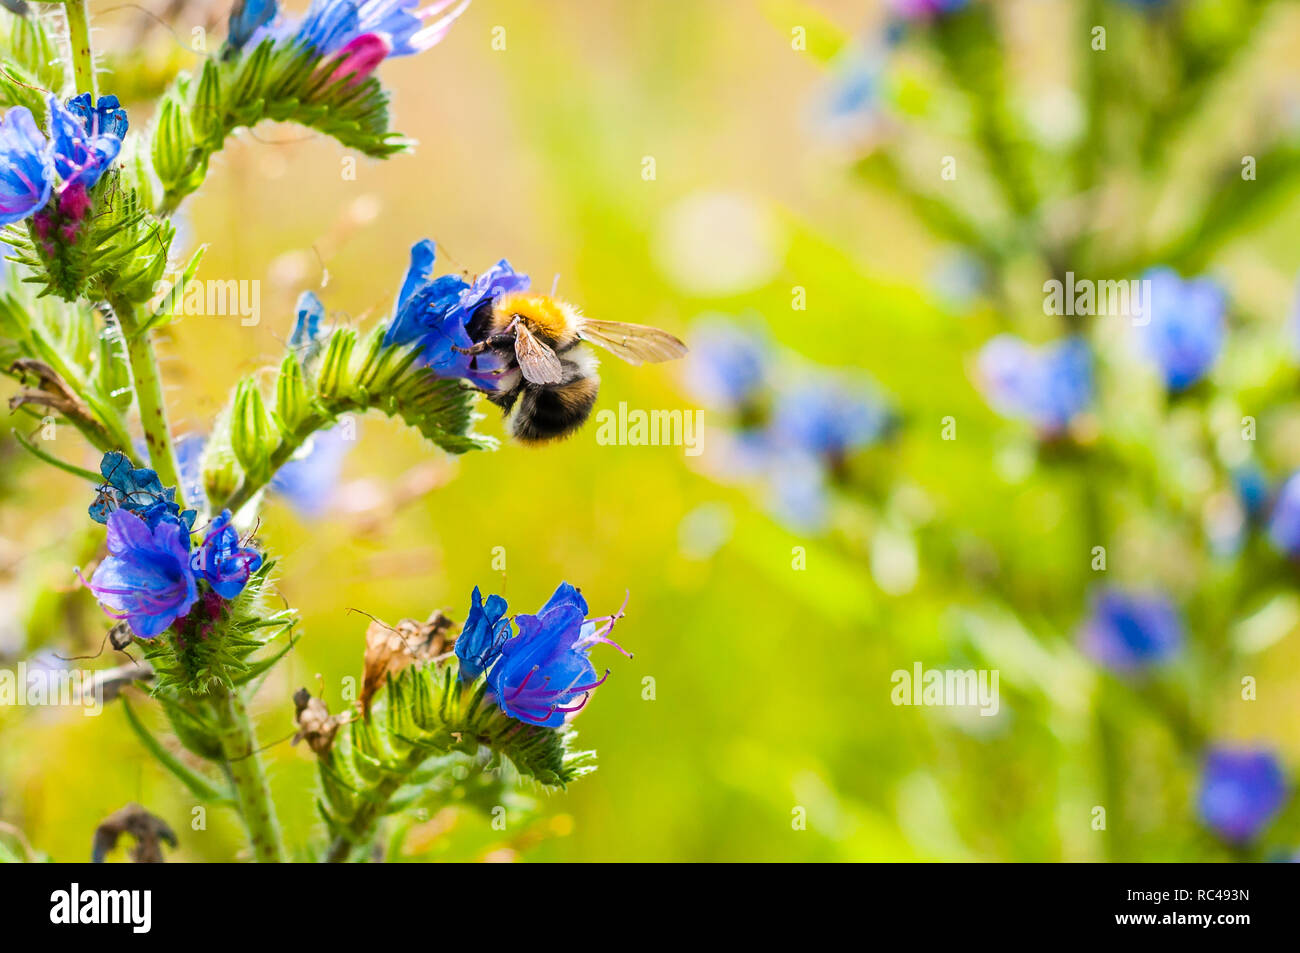 Worker bumblebee collecting nectar from wild blooming vibrant blue Echium vulgare, blueweed flower plants in the field Stock Photo